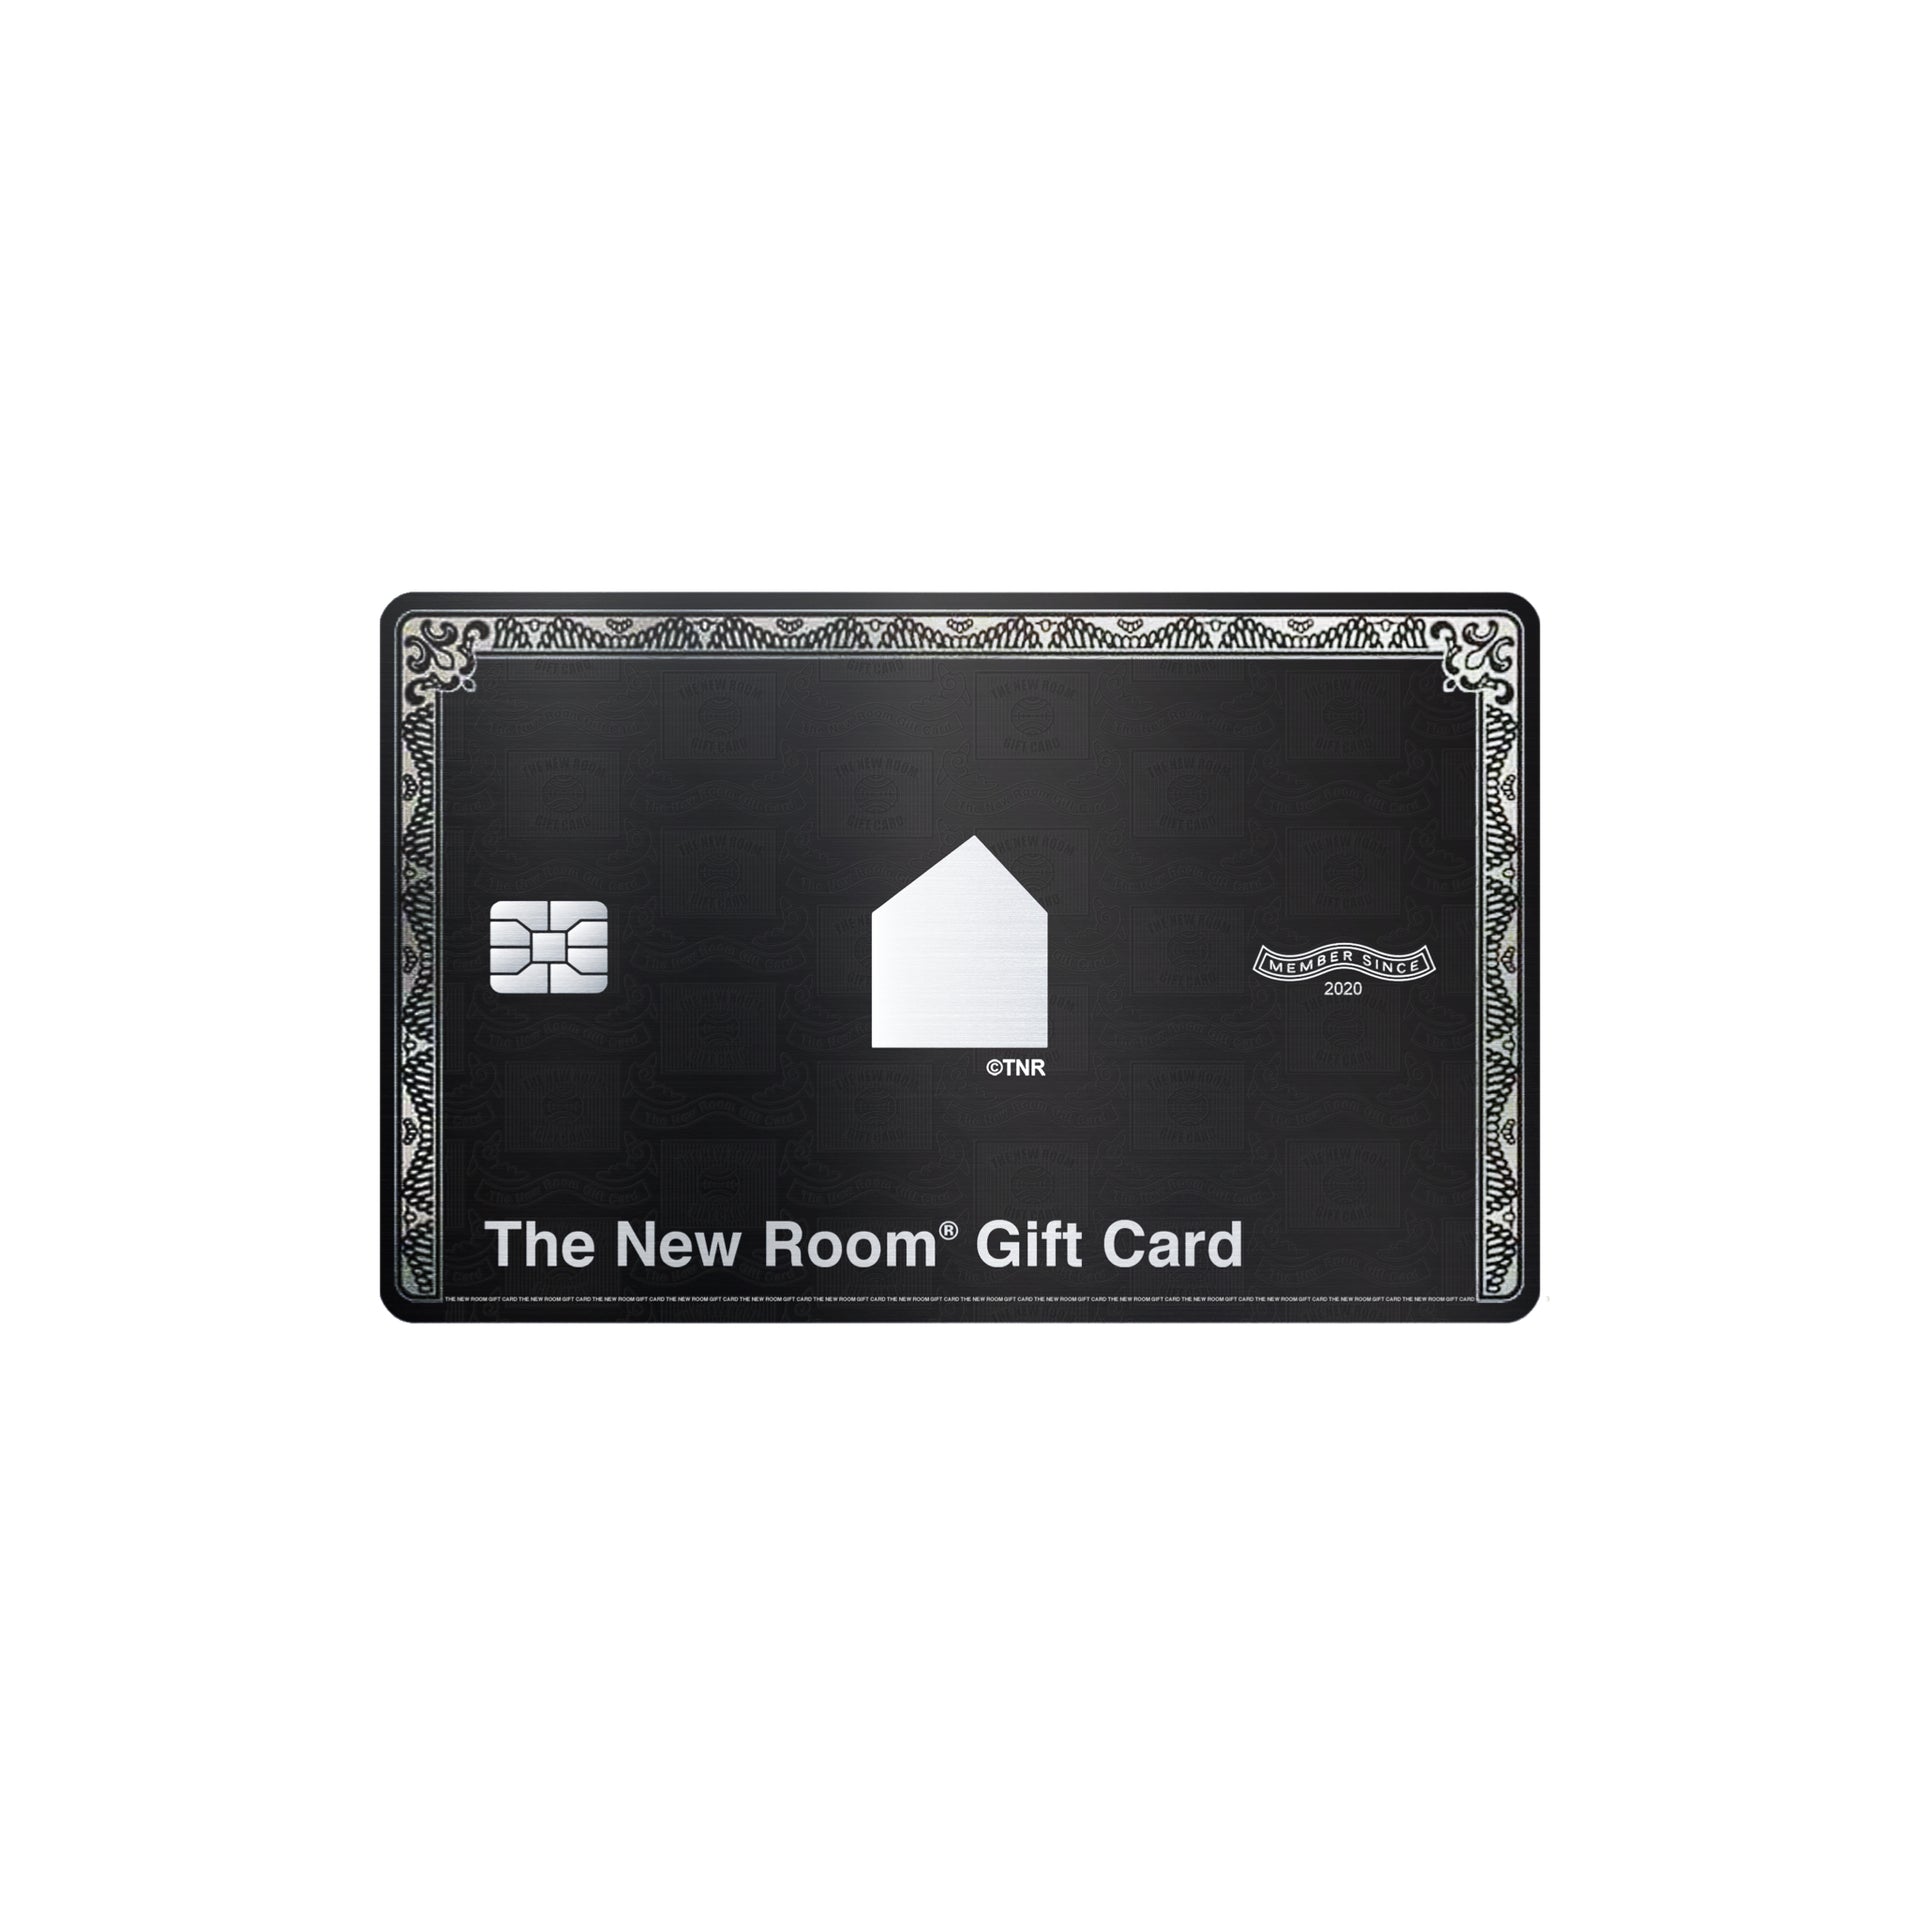 The New Room Gift Cards